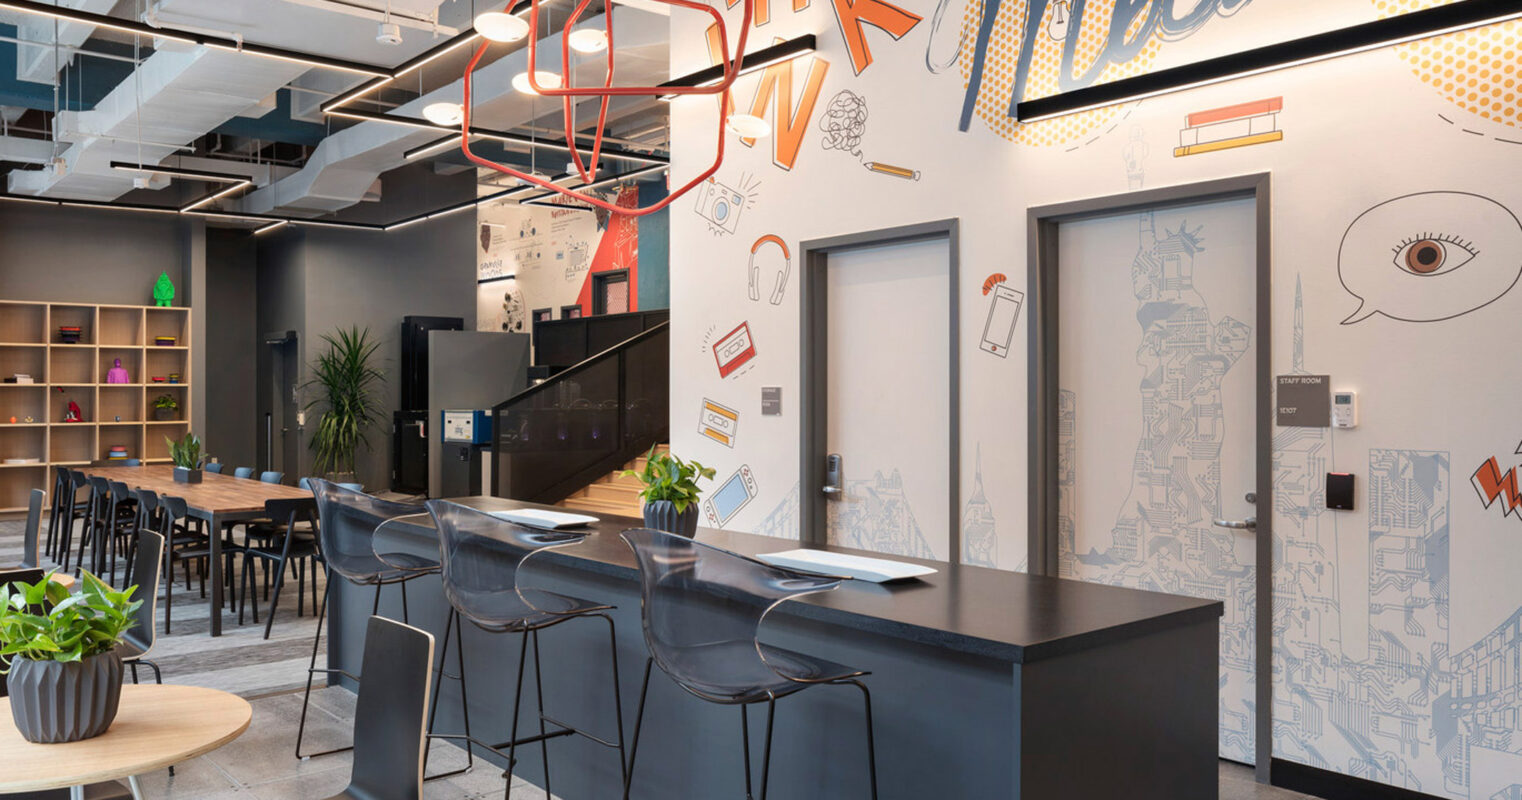 Modern office breakroom featuring a mural with playful typography, exposed ceiling with hanging red geometric light fixtures, sleek black countertop with high stools, and a communal wooden dining table.